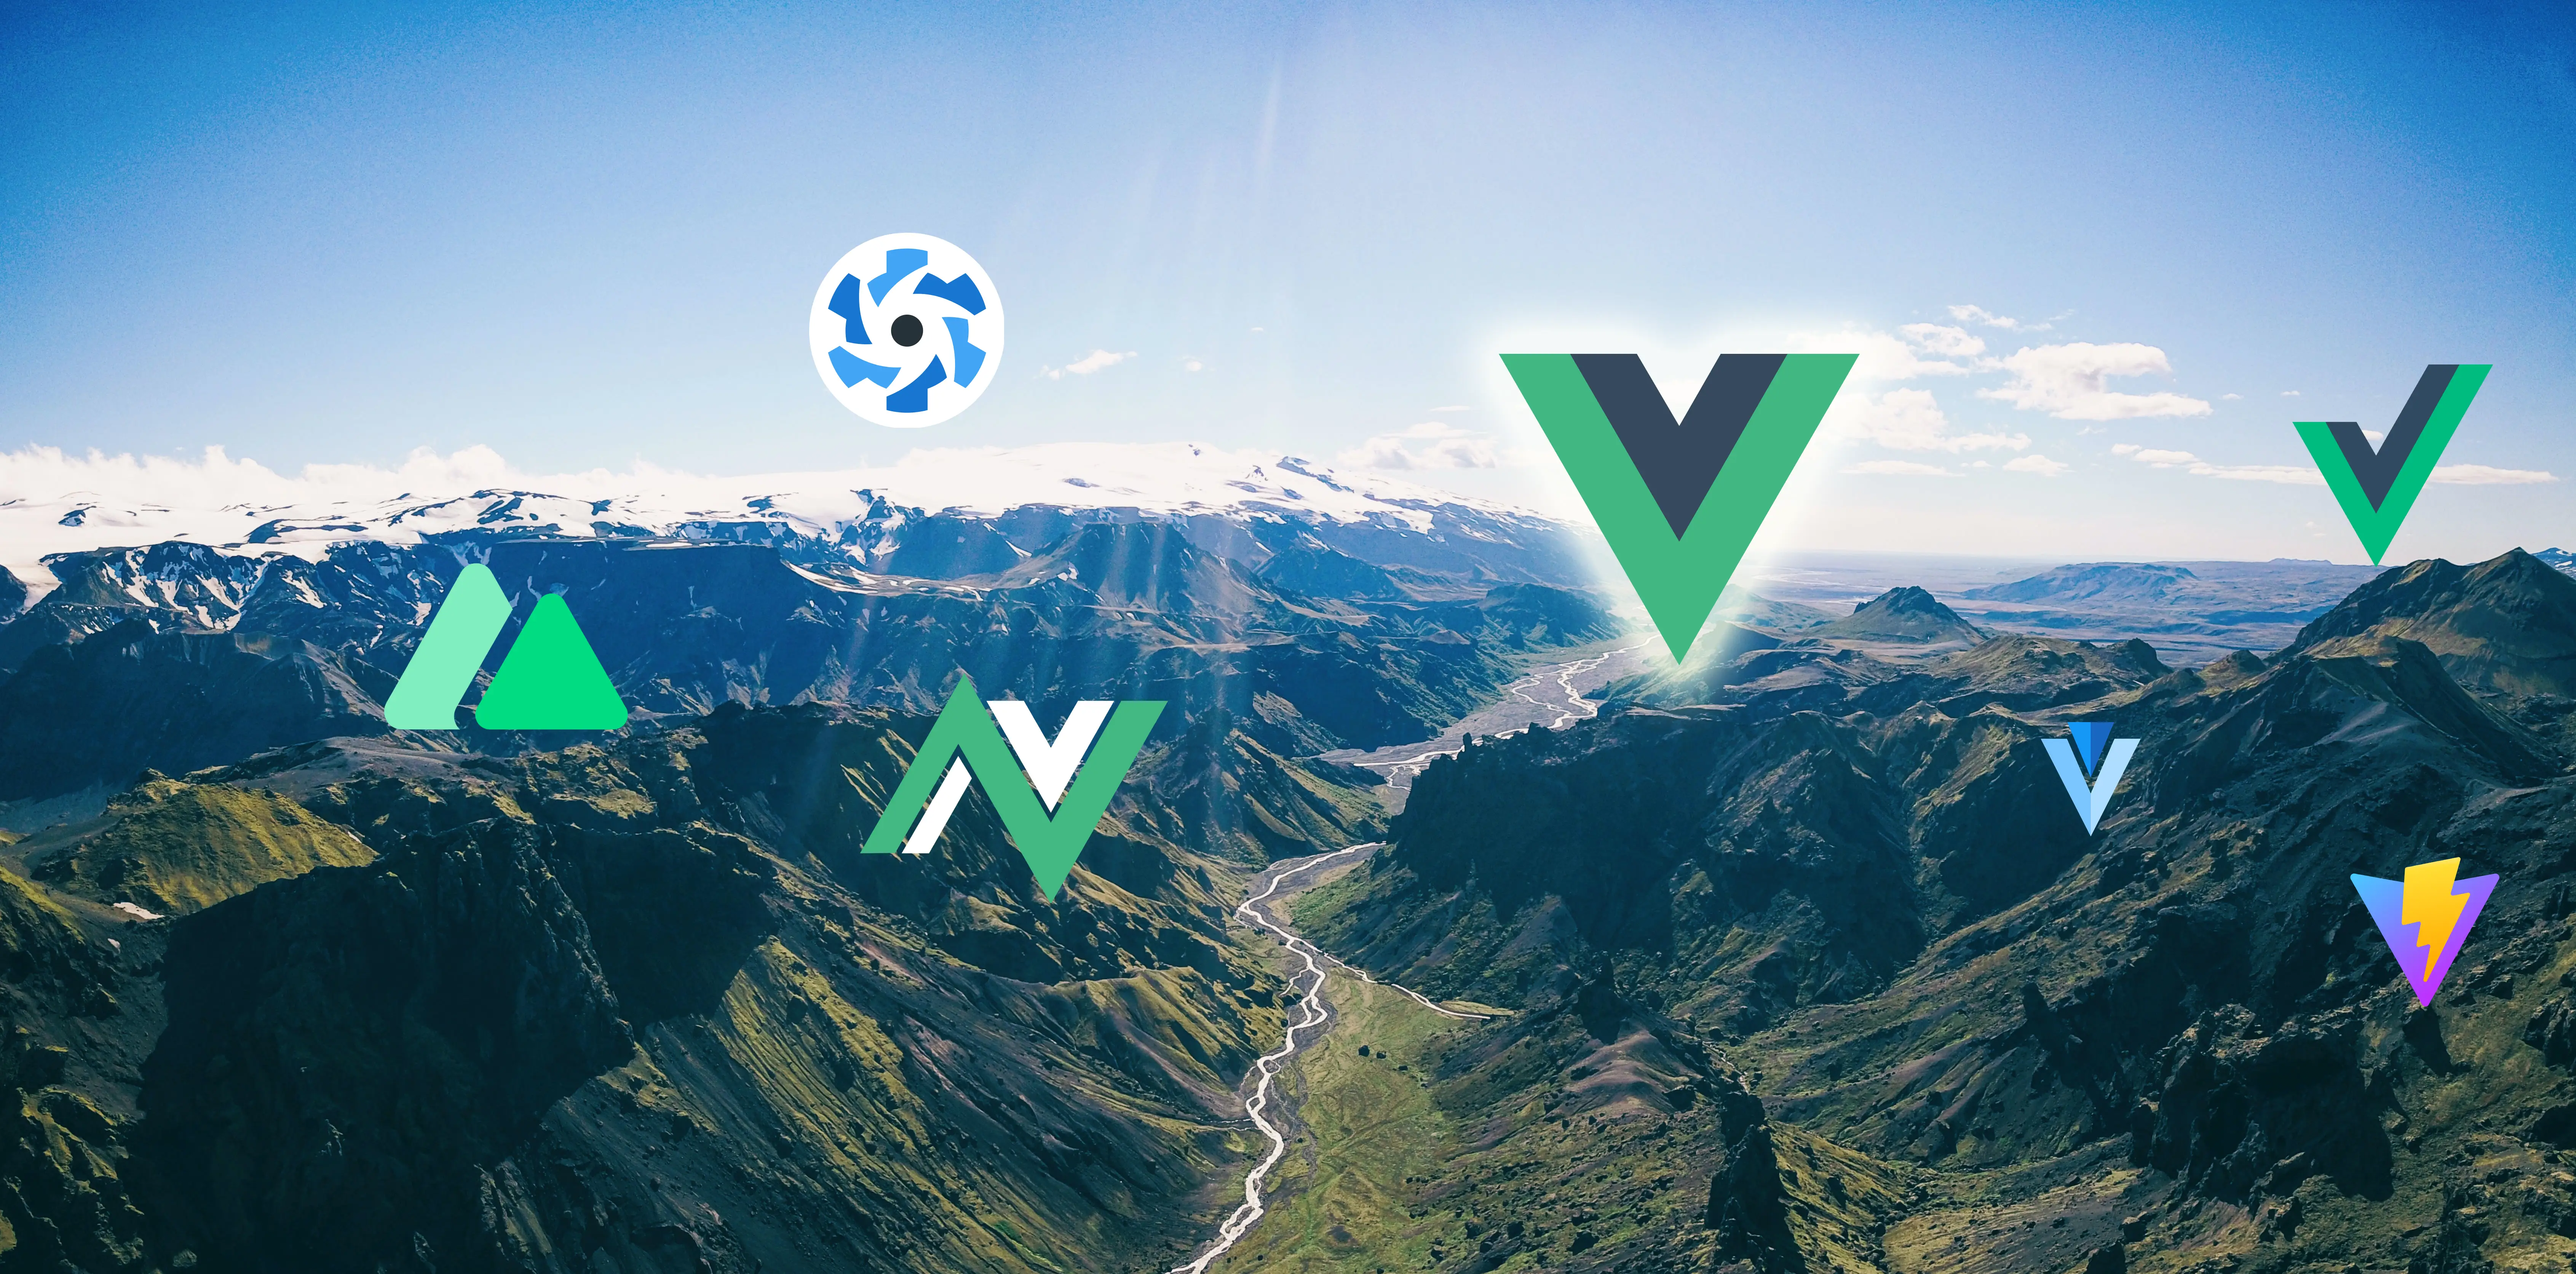 Coming Into Vue: What's Next in Vue 3